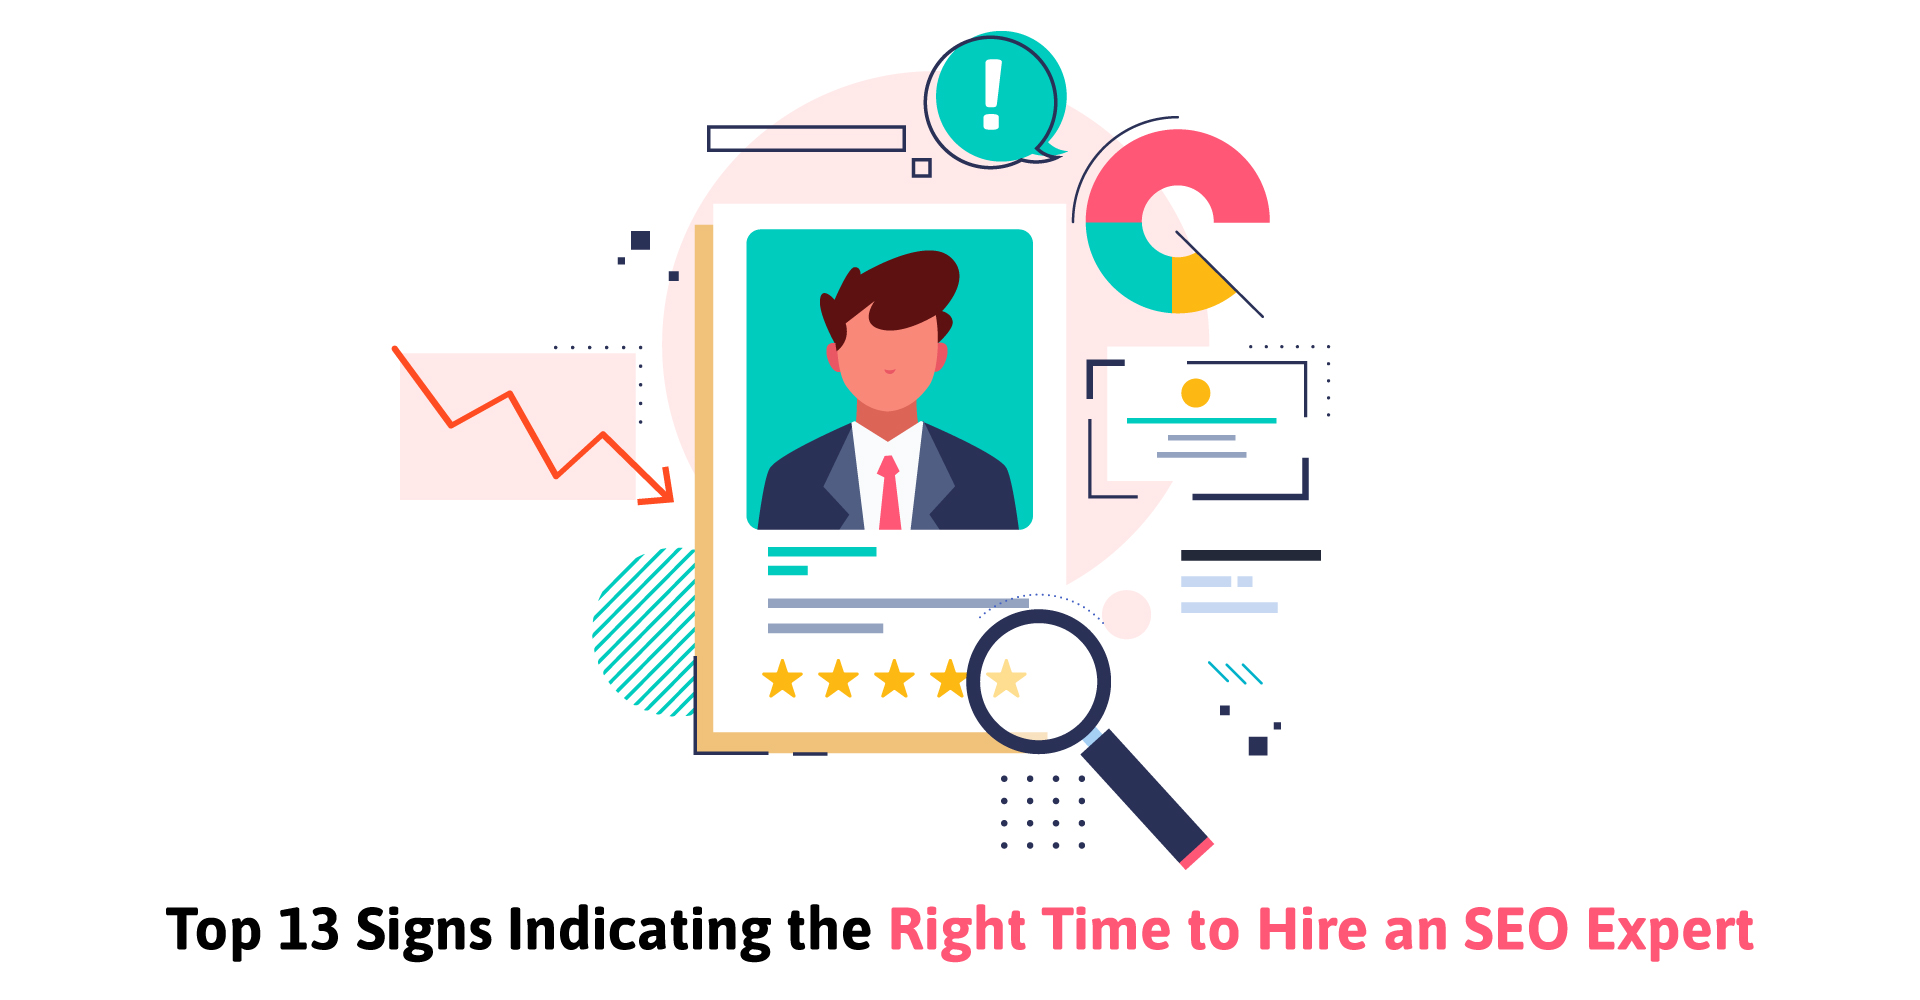 Top 13 Signs Indicating the Right Time to Hire an SEO Expert